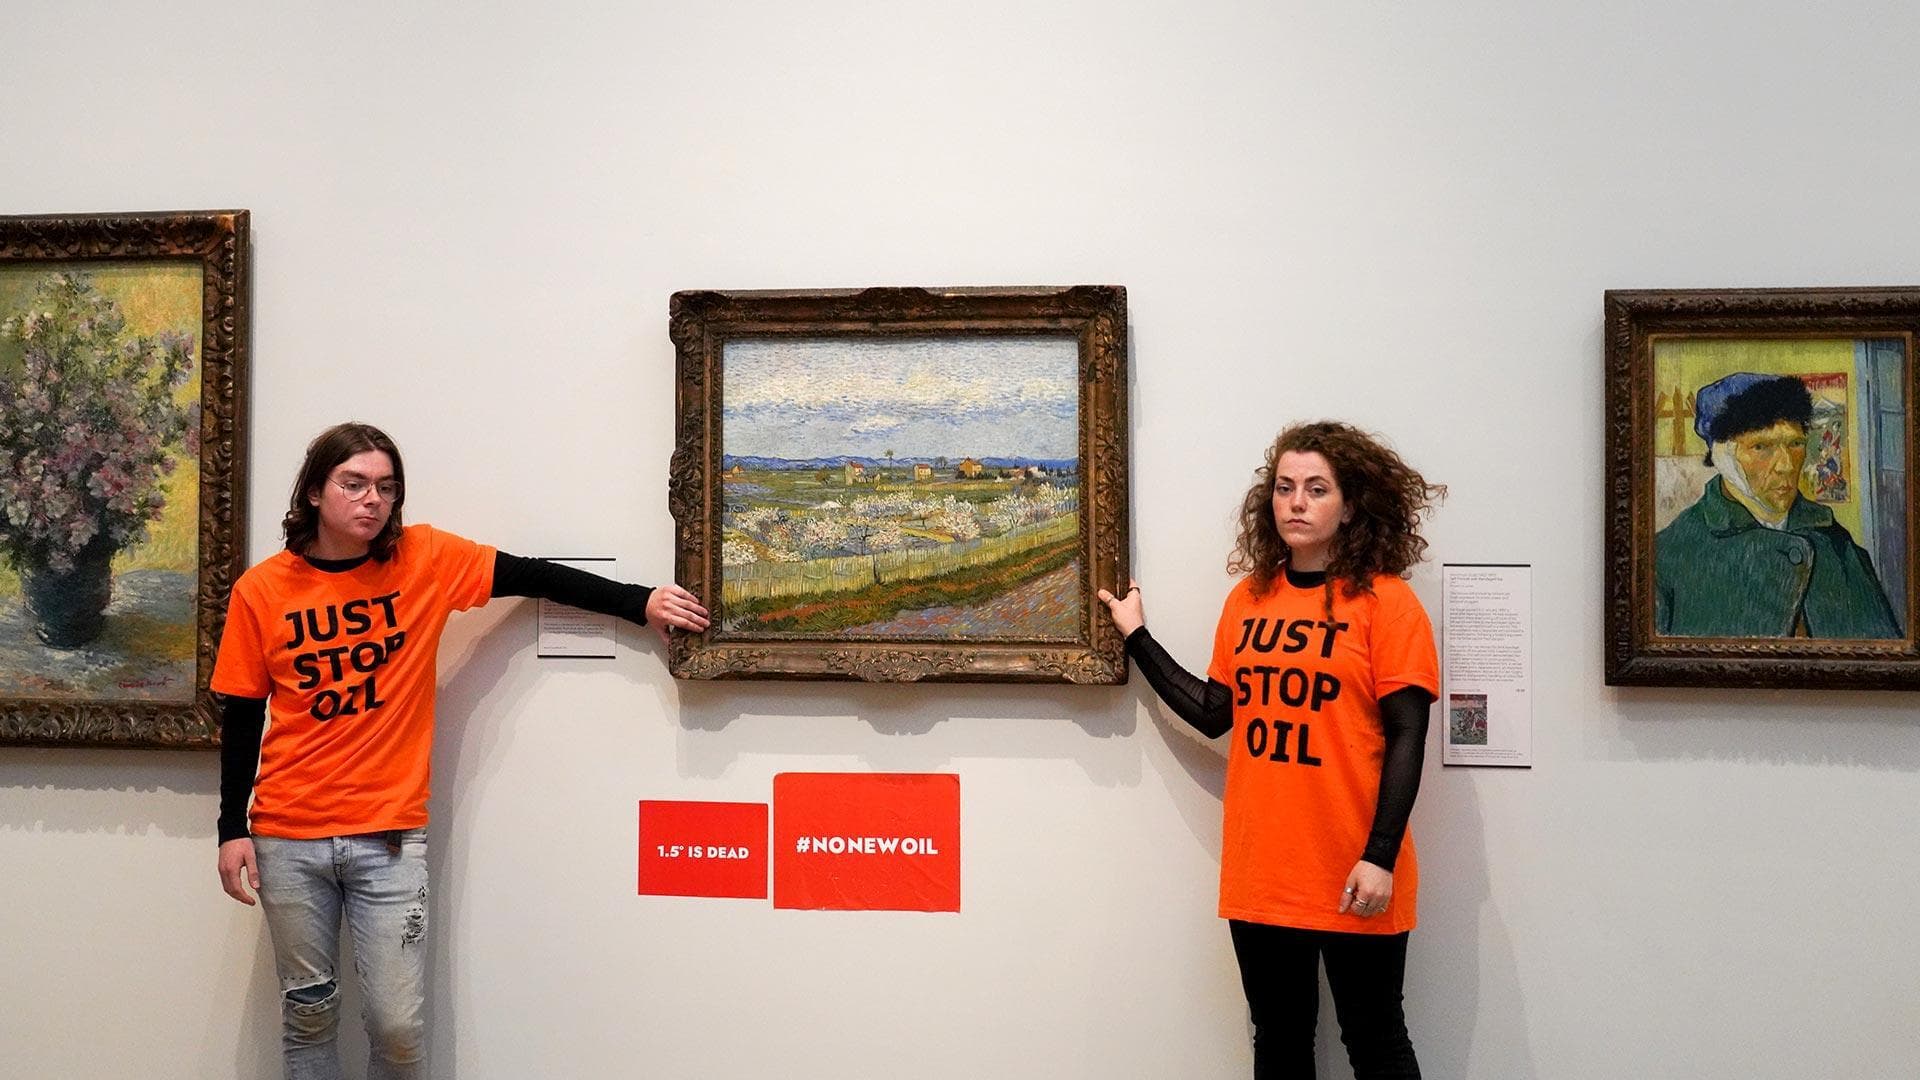 Just Stop Oil climate activists glue themselves to a Van Gogh painting at the Courtauld Gallery in London last June. Such performative tactics, what UMD researcher Dana R. Fisher calls “disruption as shock,” have become more popular among young climate activists.